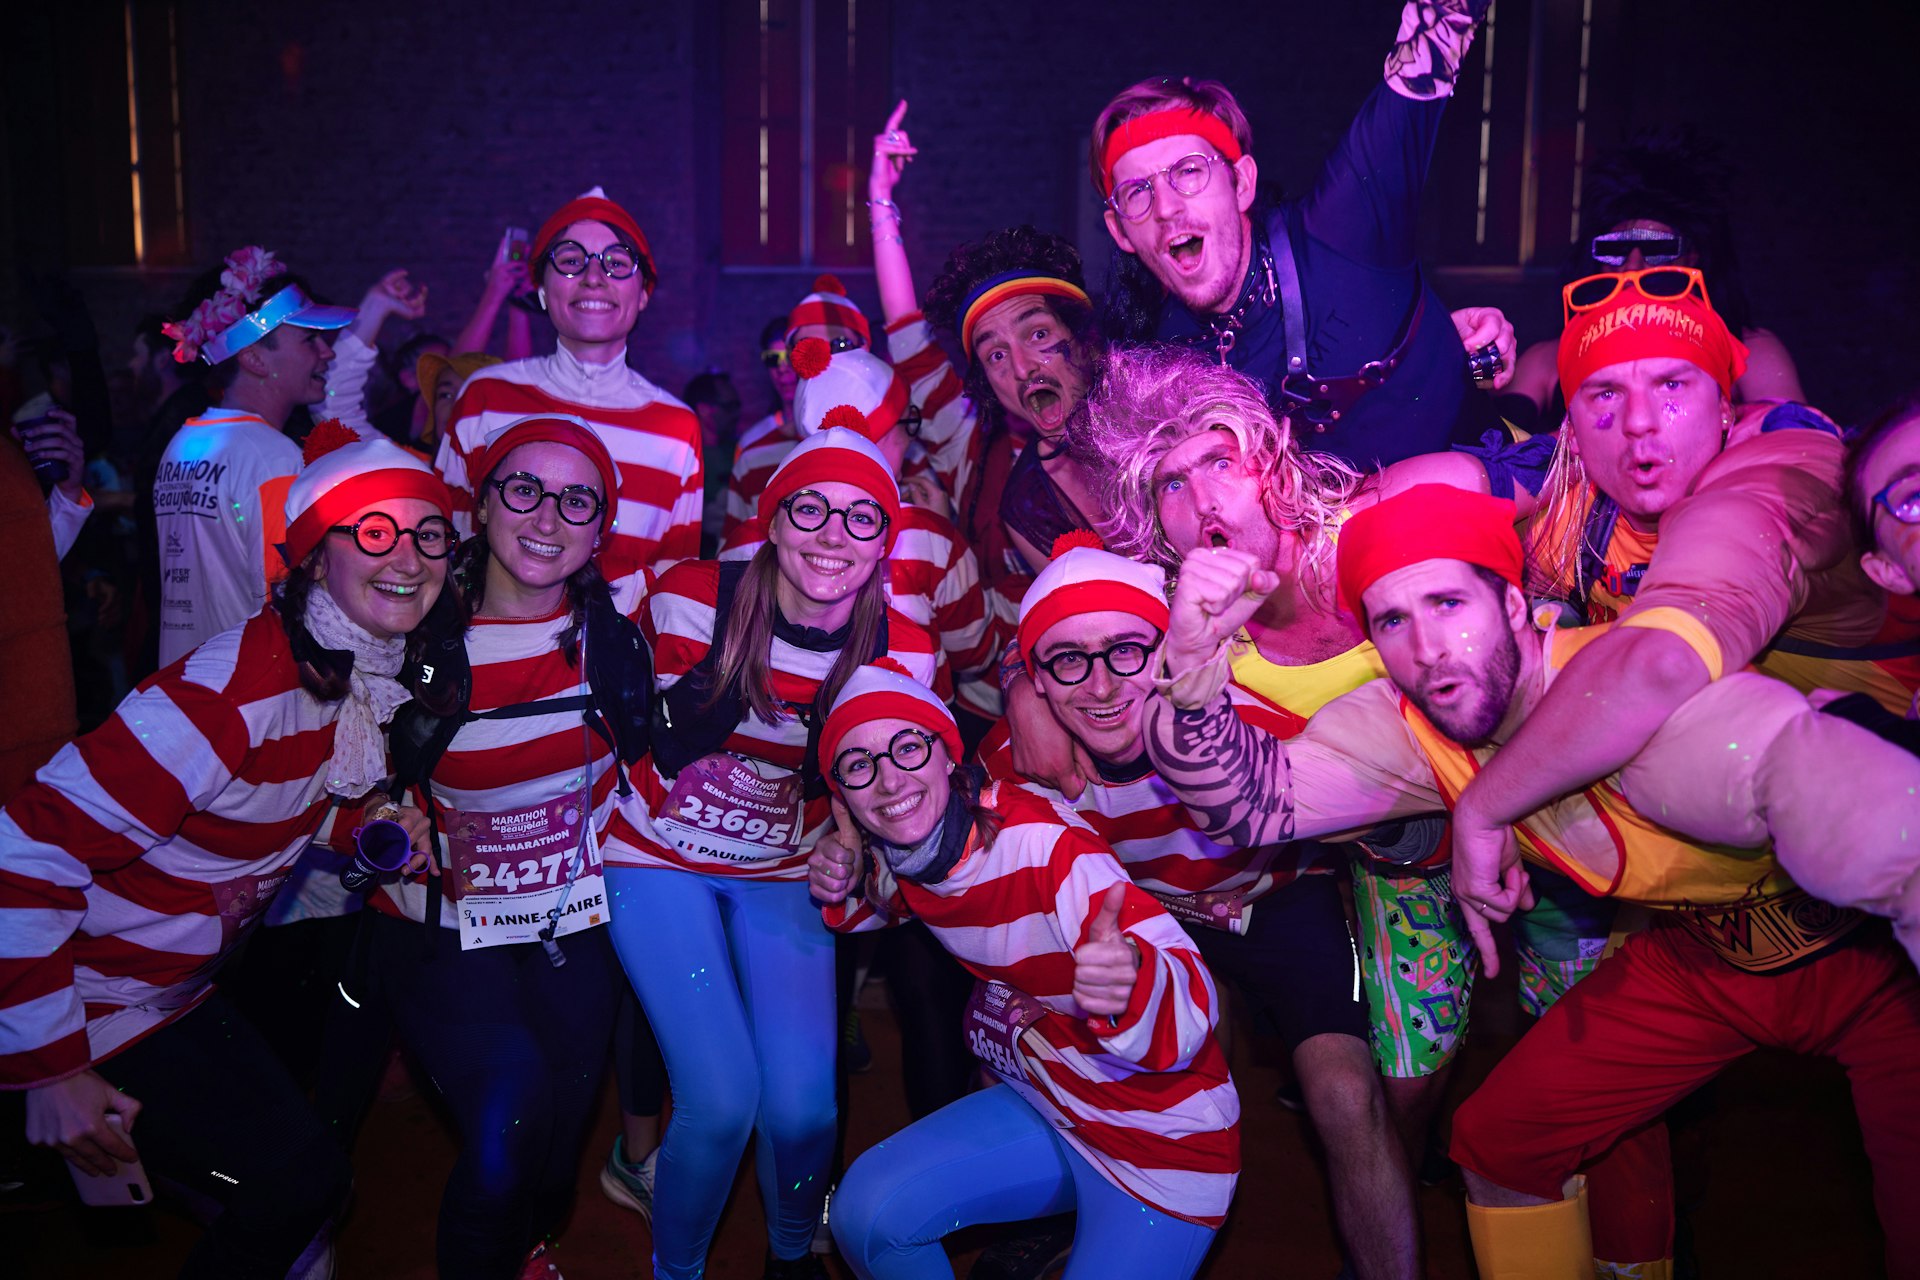 Friends dressed up as Where's Wally (Waldo) at the Beaujolais Wine Marathon afterparty